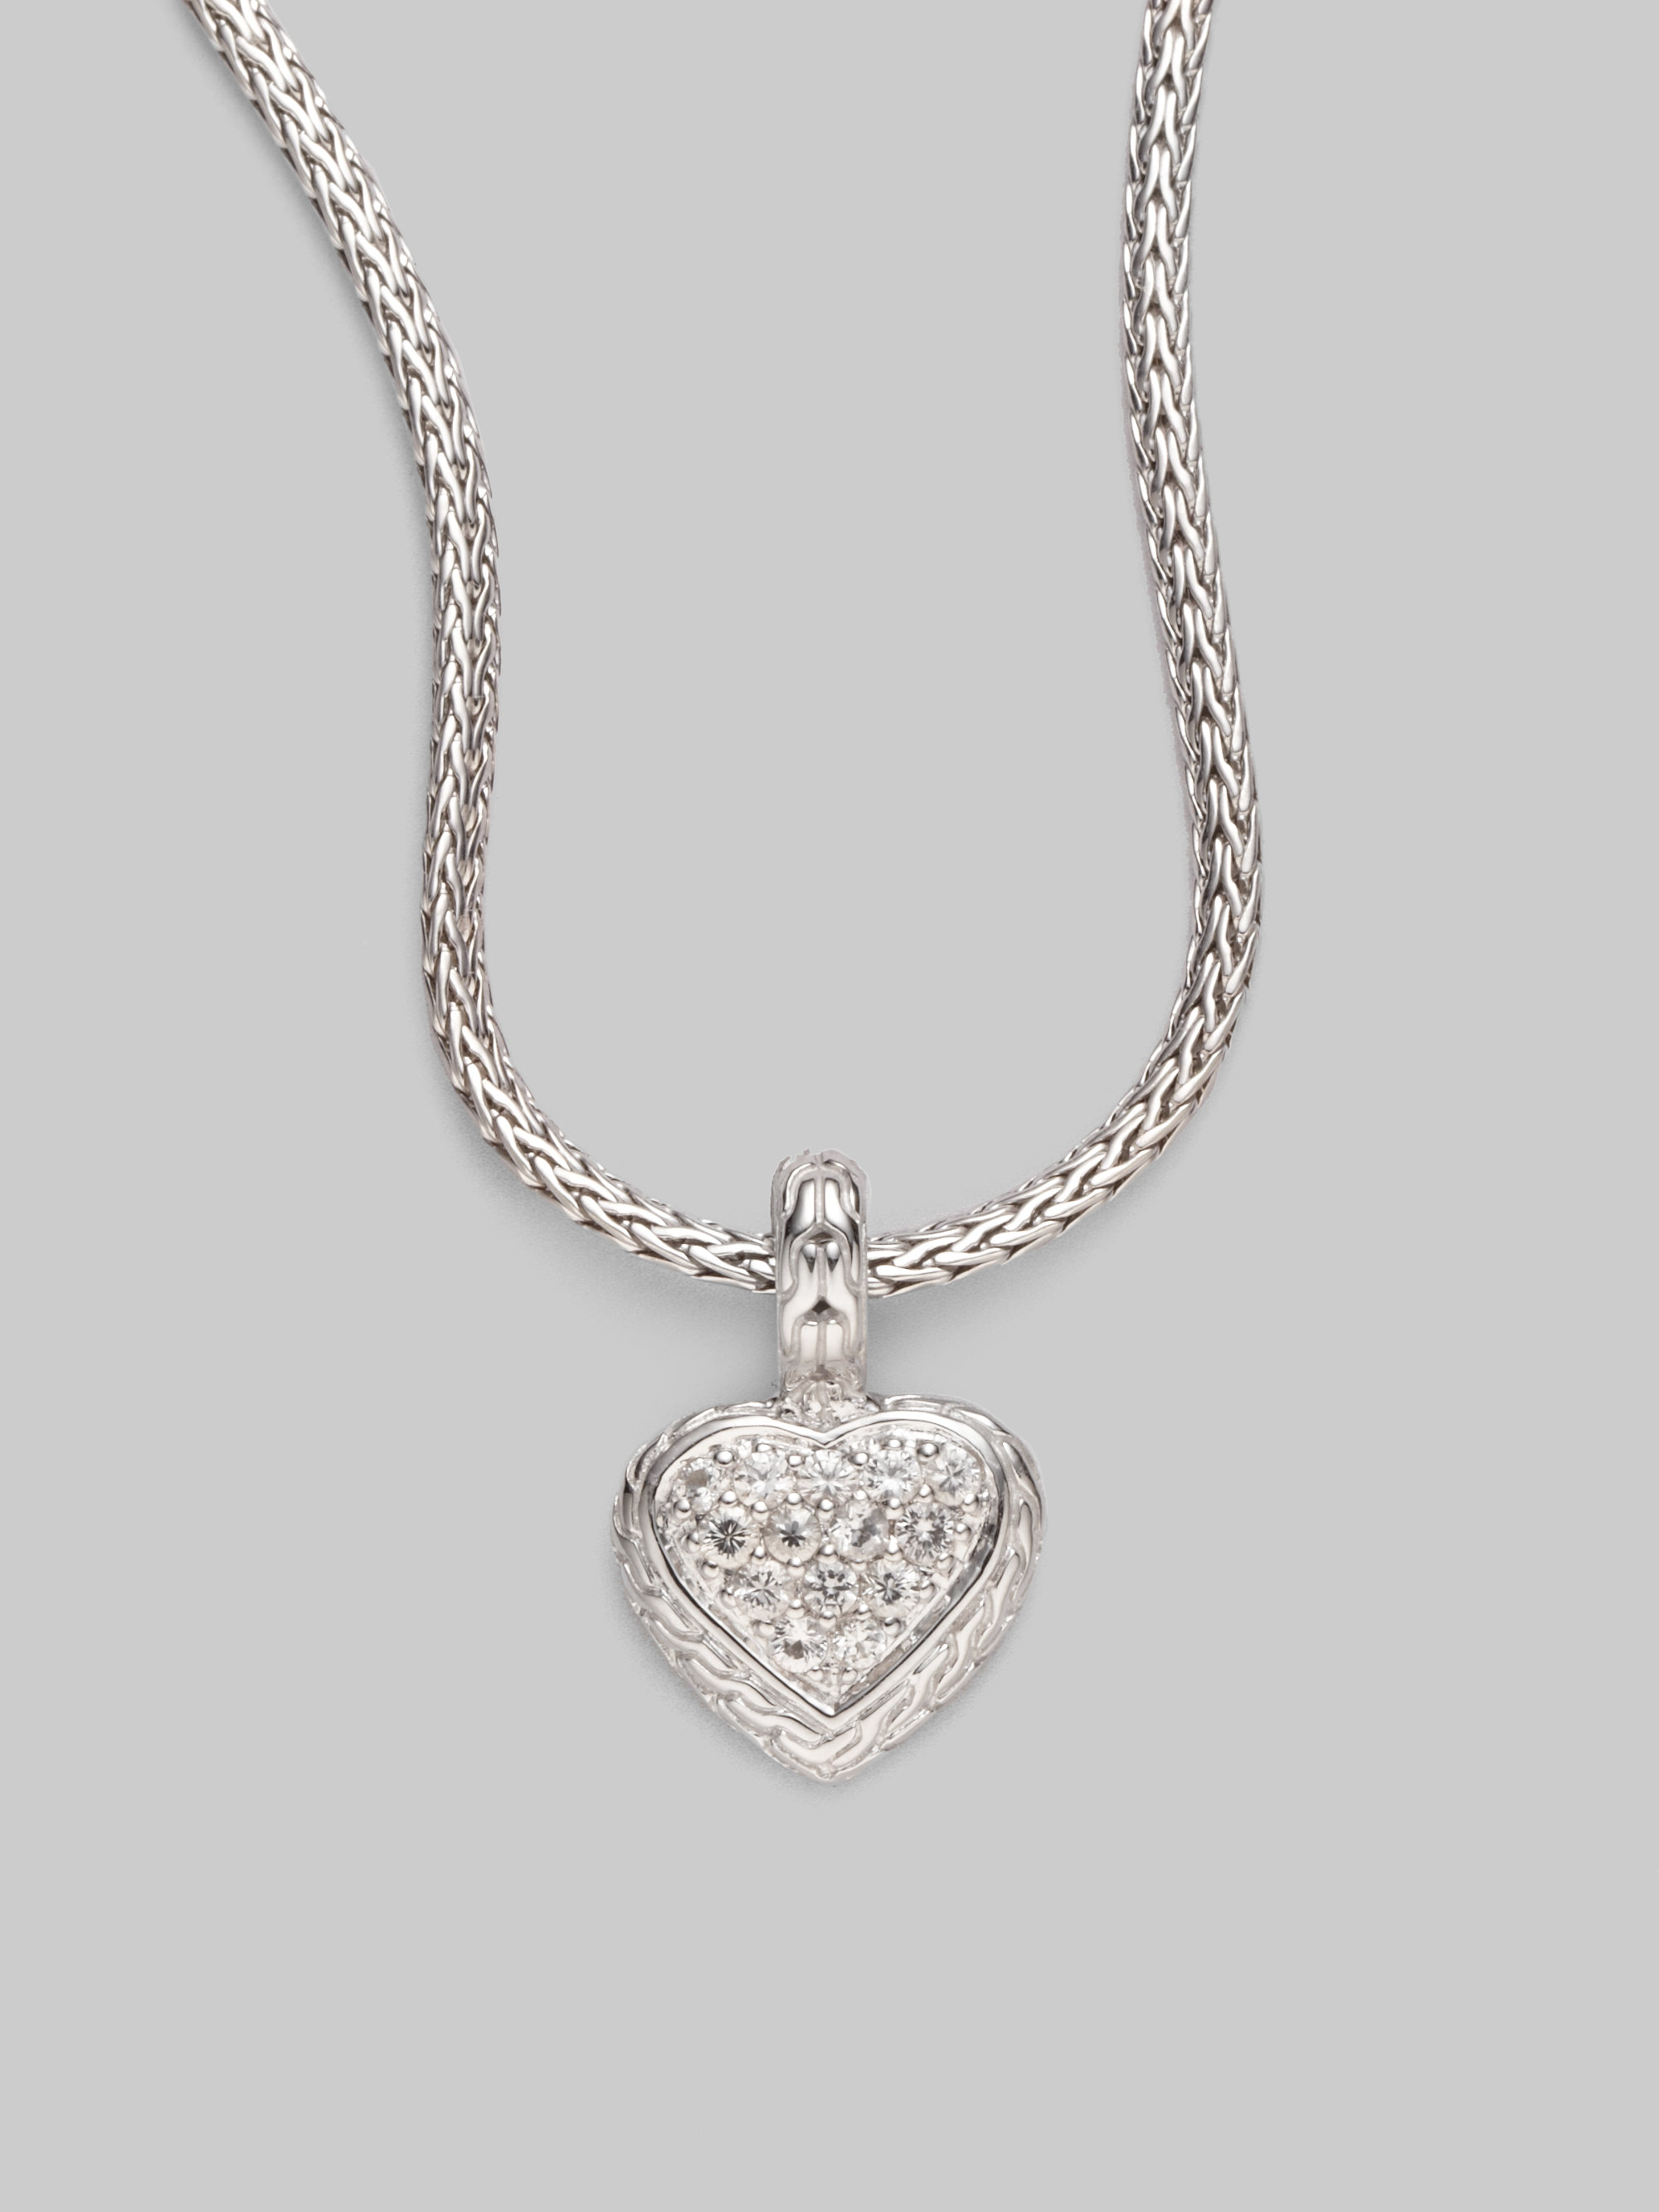 John Hardy White Sapphire Sterling Silver Small Heart Pendant Necklace